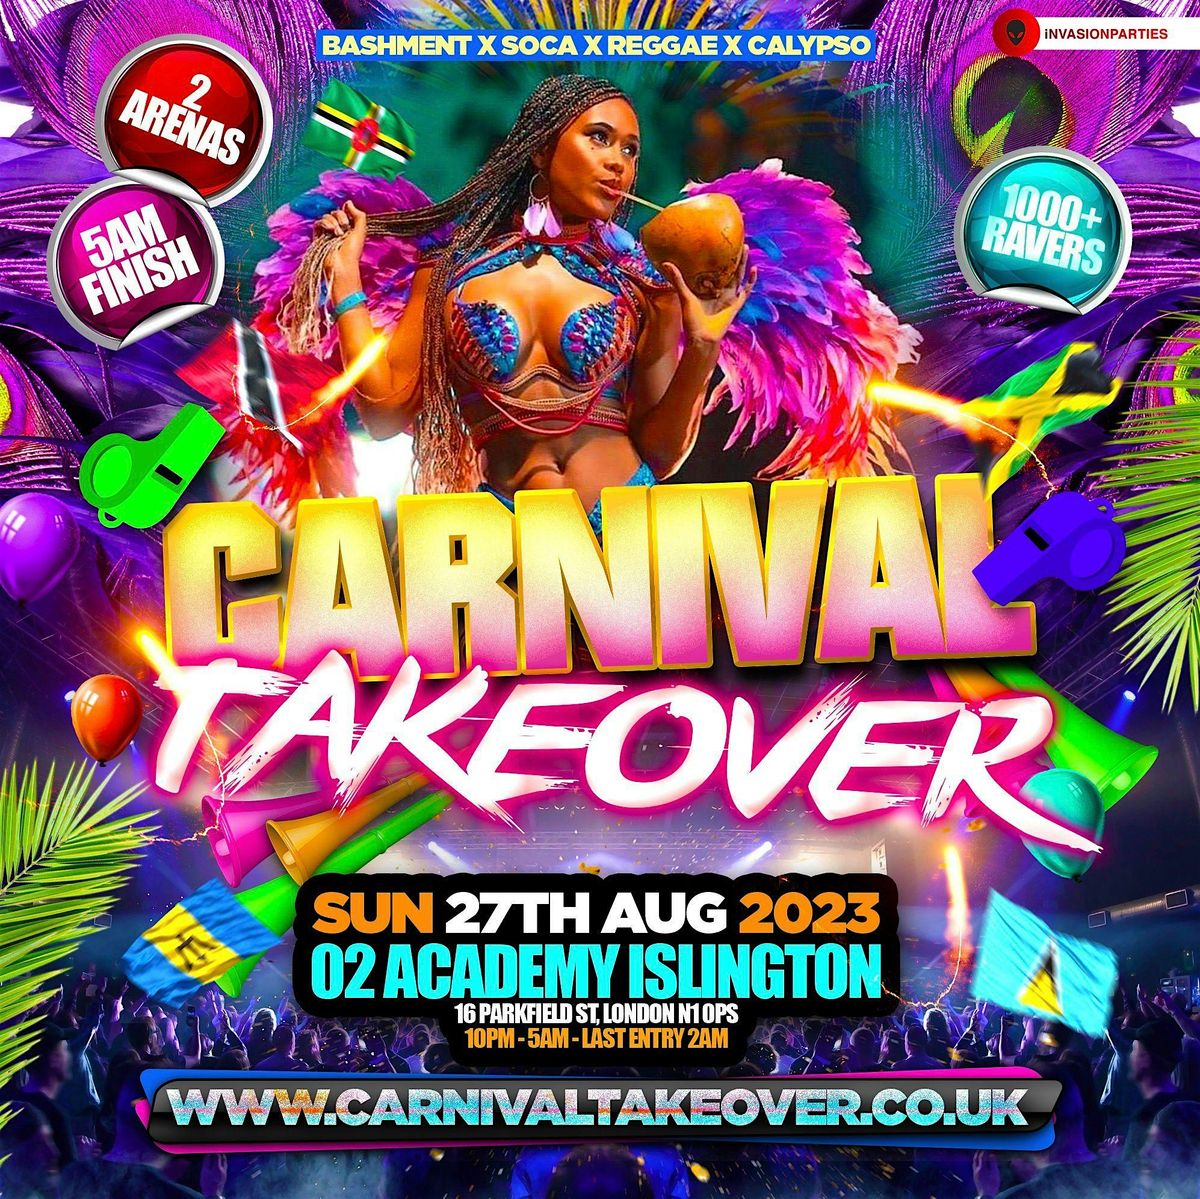 CARNIVAL TAKEOVER - EVERYONE FREE BEFORE 12AM